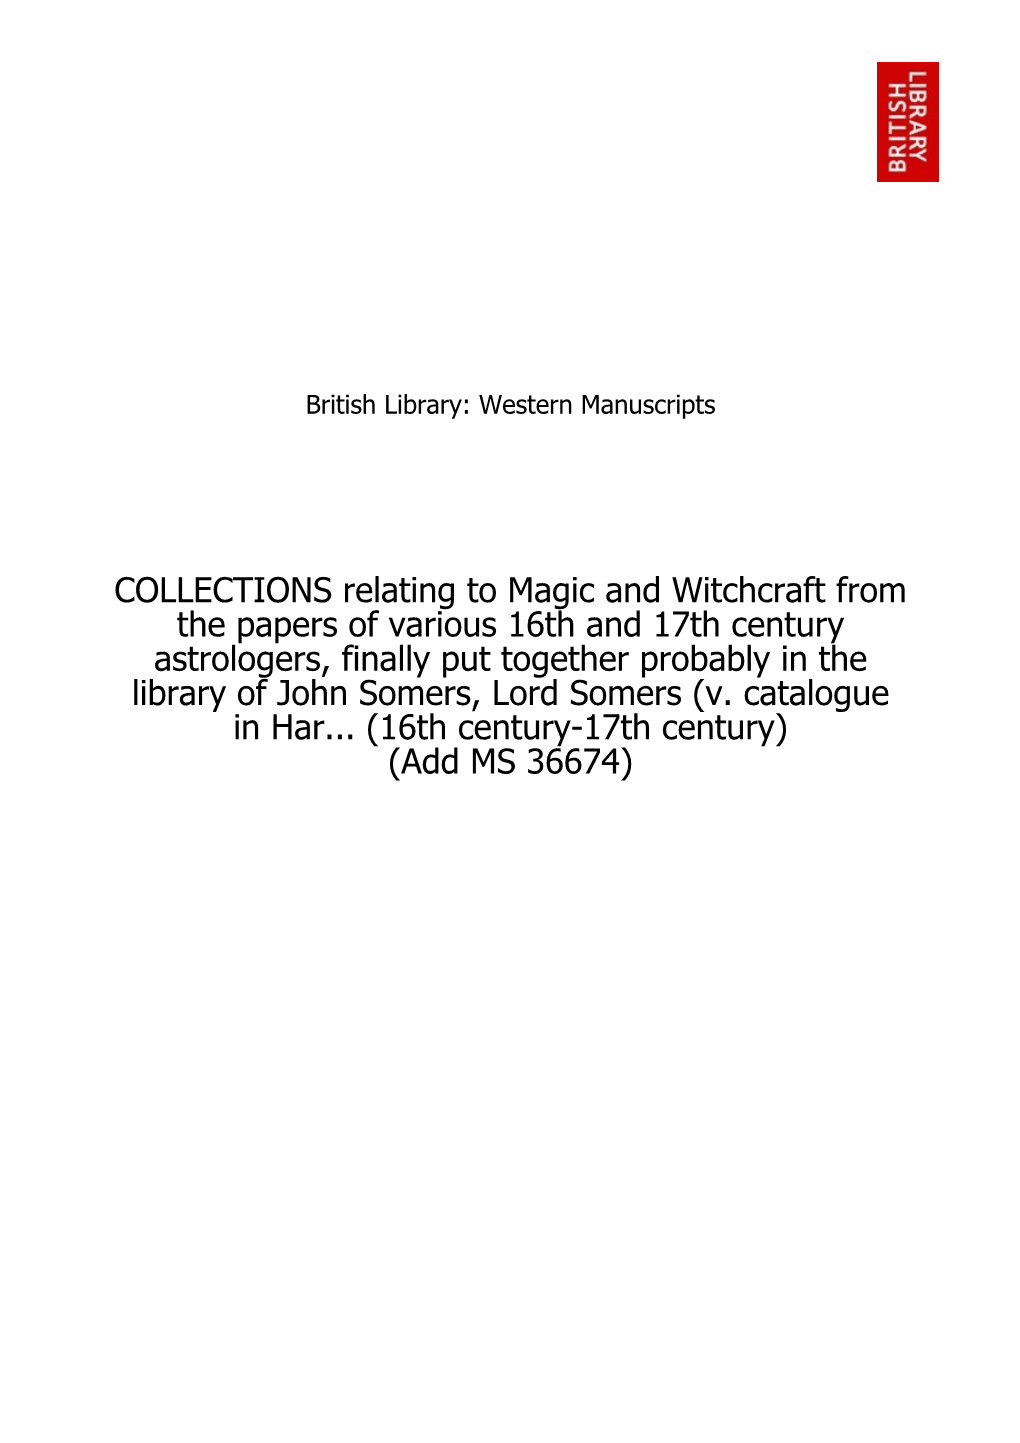 COLLECTIONS Relating to Magic and Witchcraft From